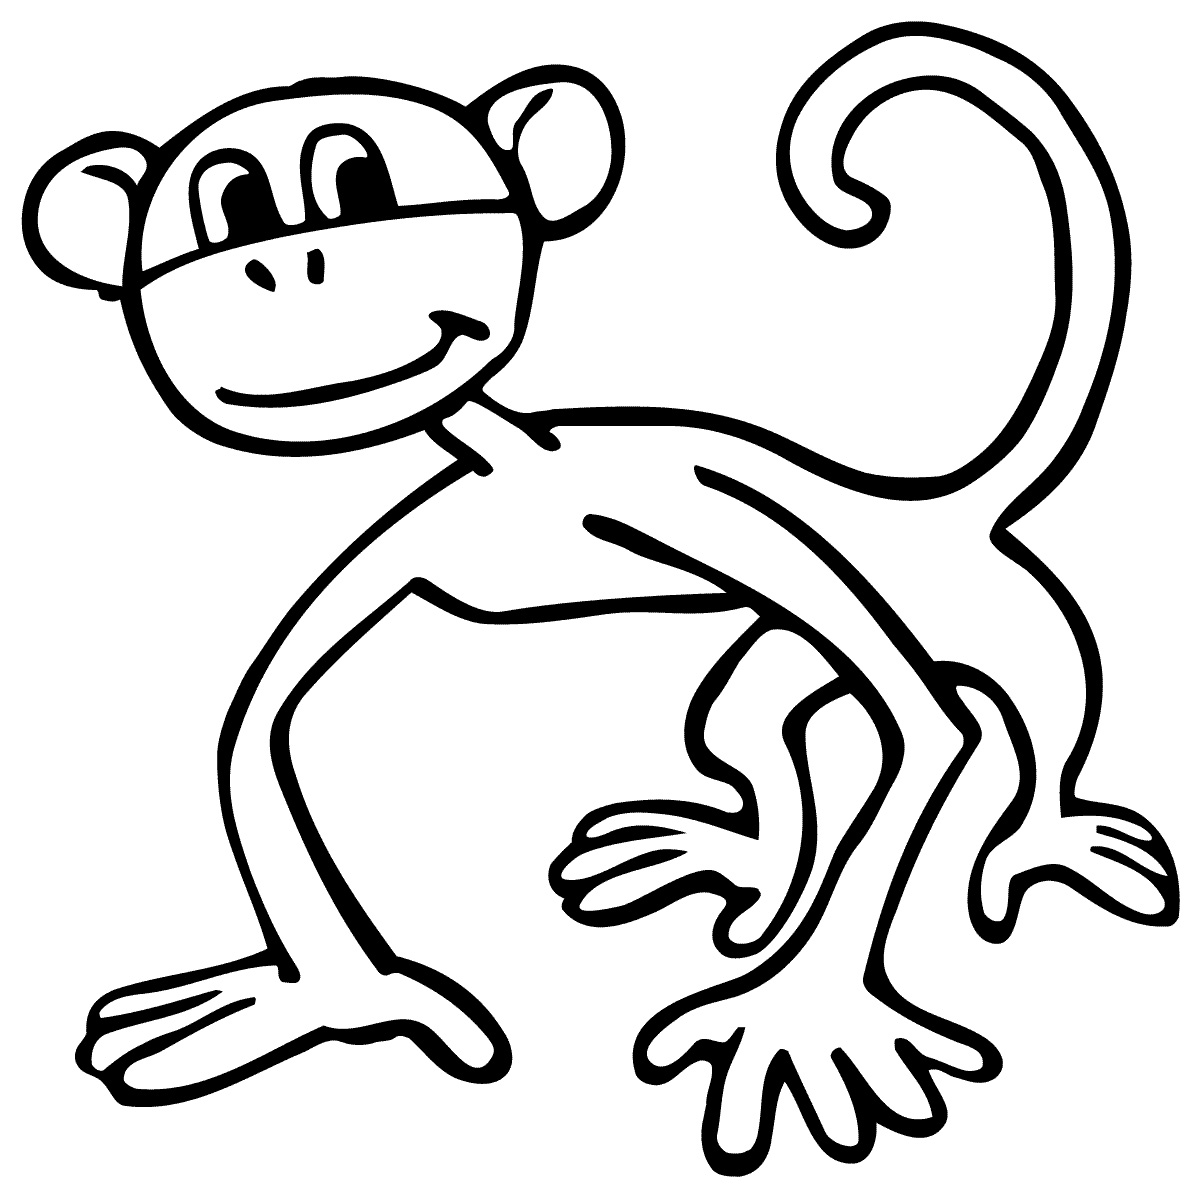 Spider Monkey clipart #20, Download drawings